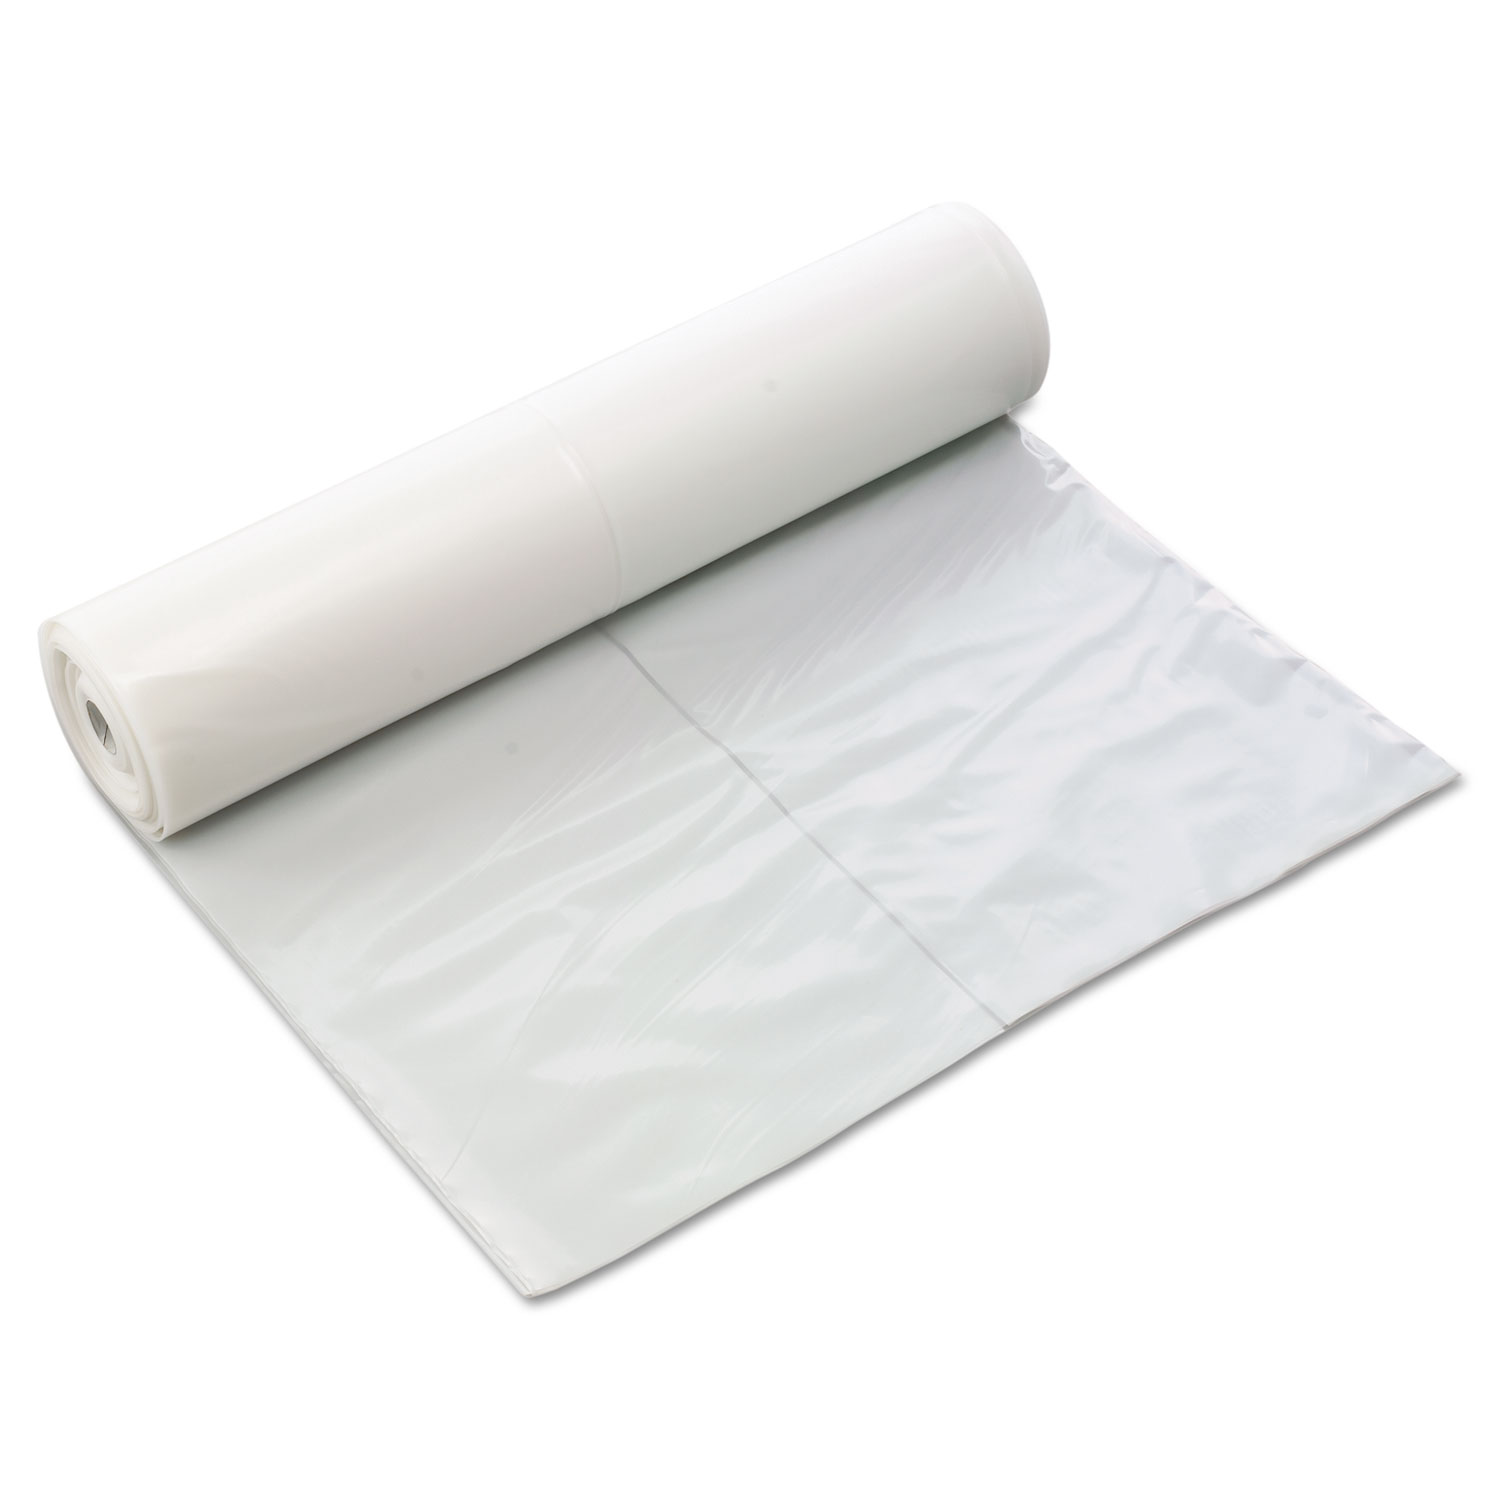 Poly-Cover Plastic Sheets, 6mil, 10 x 100, Clear